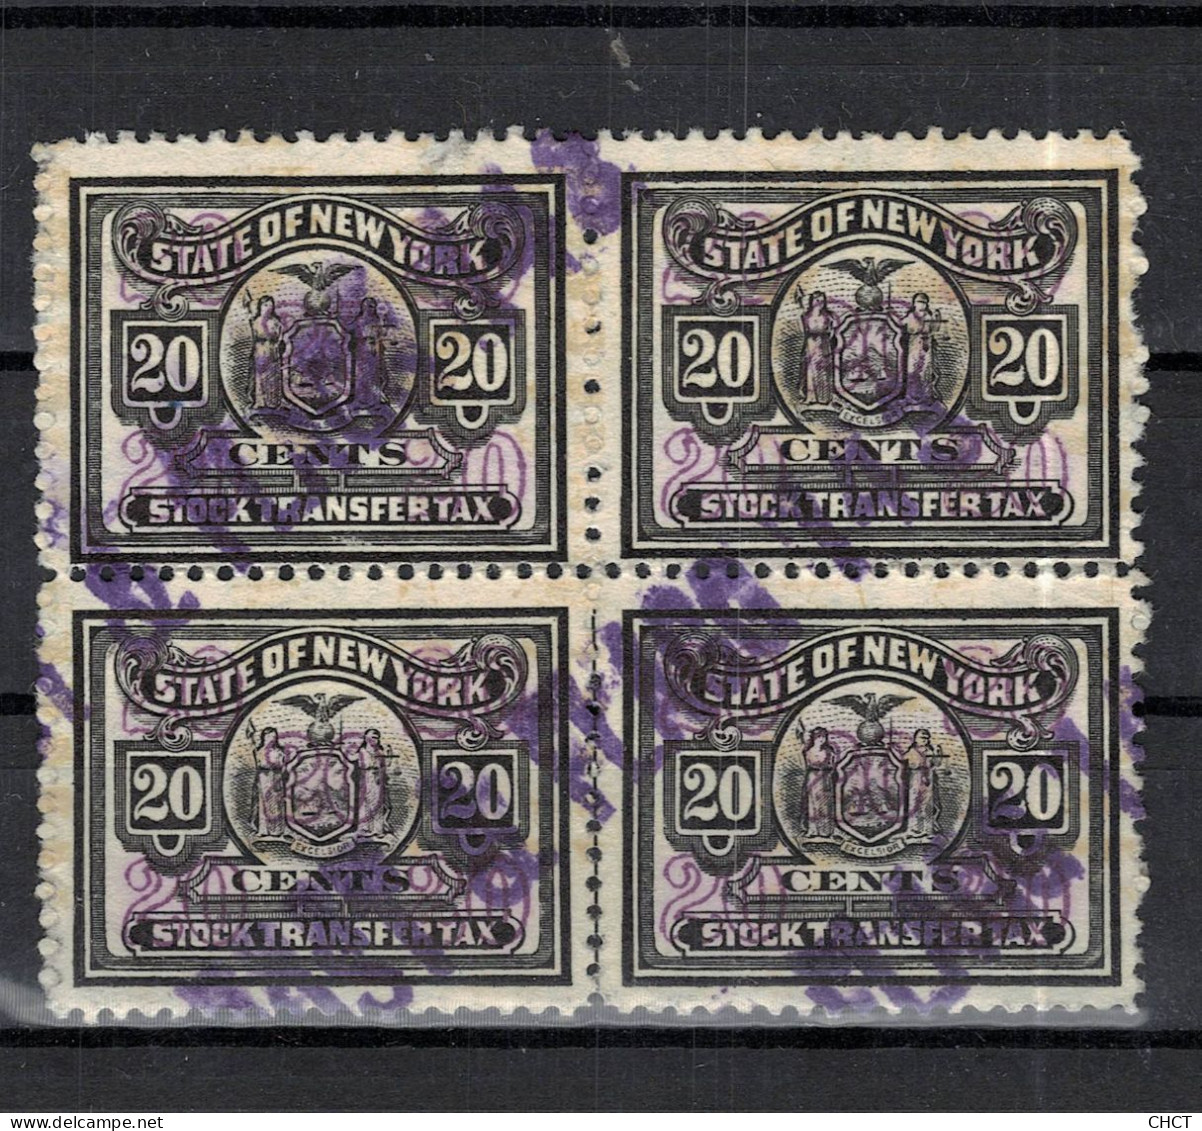 CHCT26 - State Of New York, Stock Transfer Tax Stamp, Block Of 4, America - Unclassified